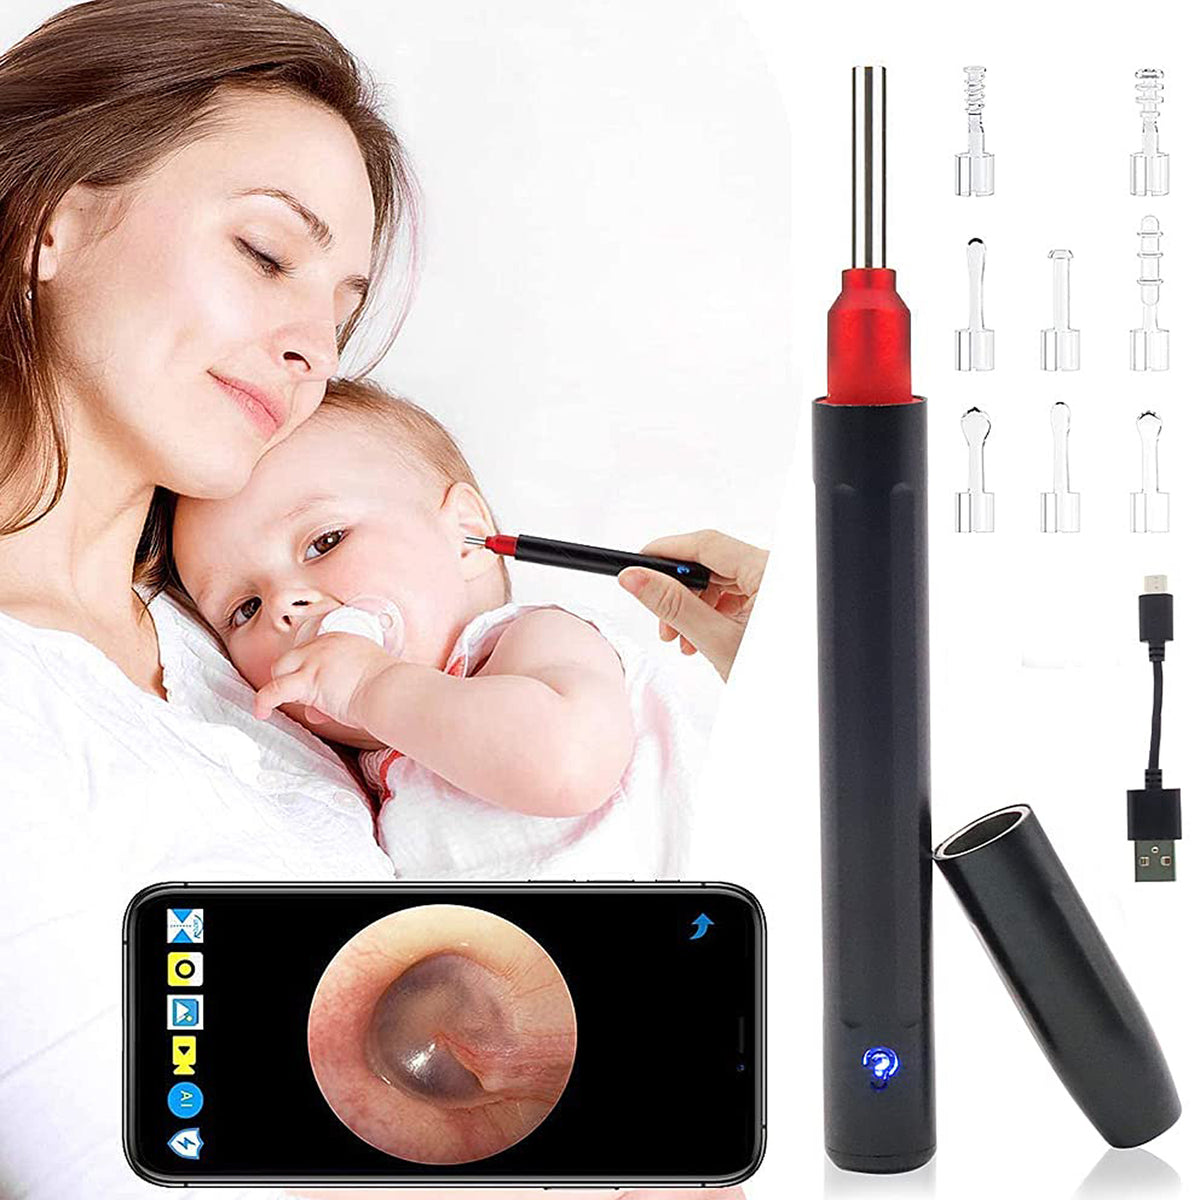 Verilux® Ear Wax Remover Tool kit for iPhone Android Smart Phones